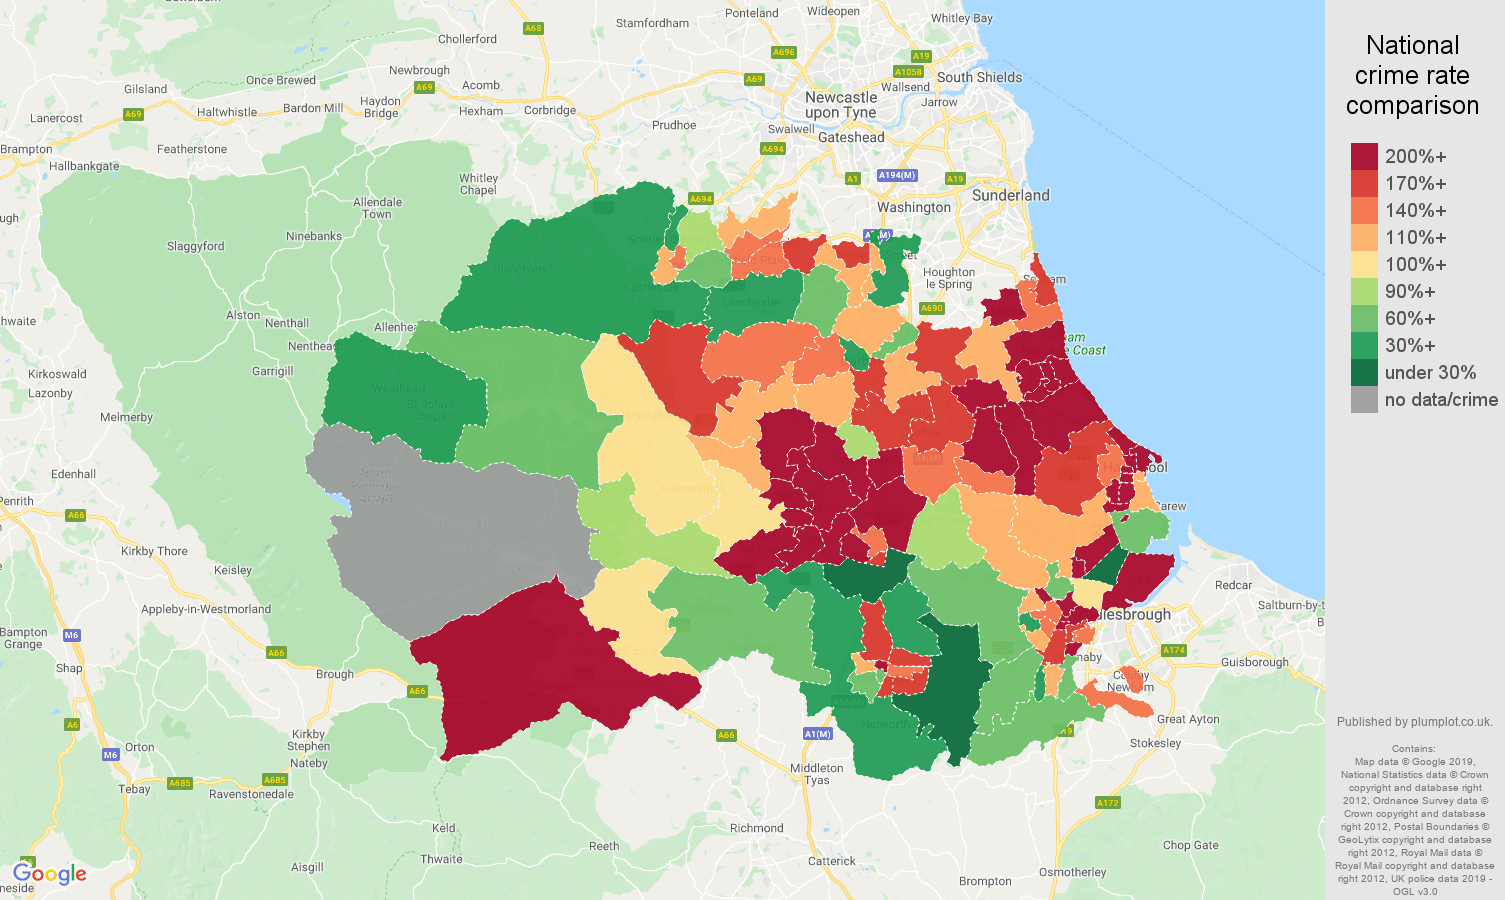 Durham county other crime rate comparison map